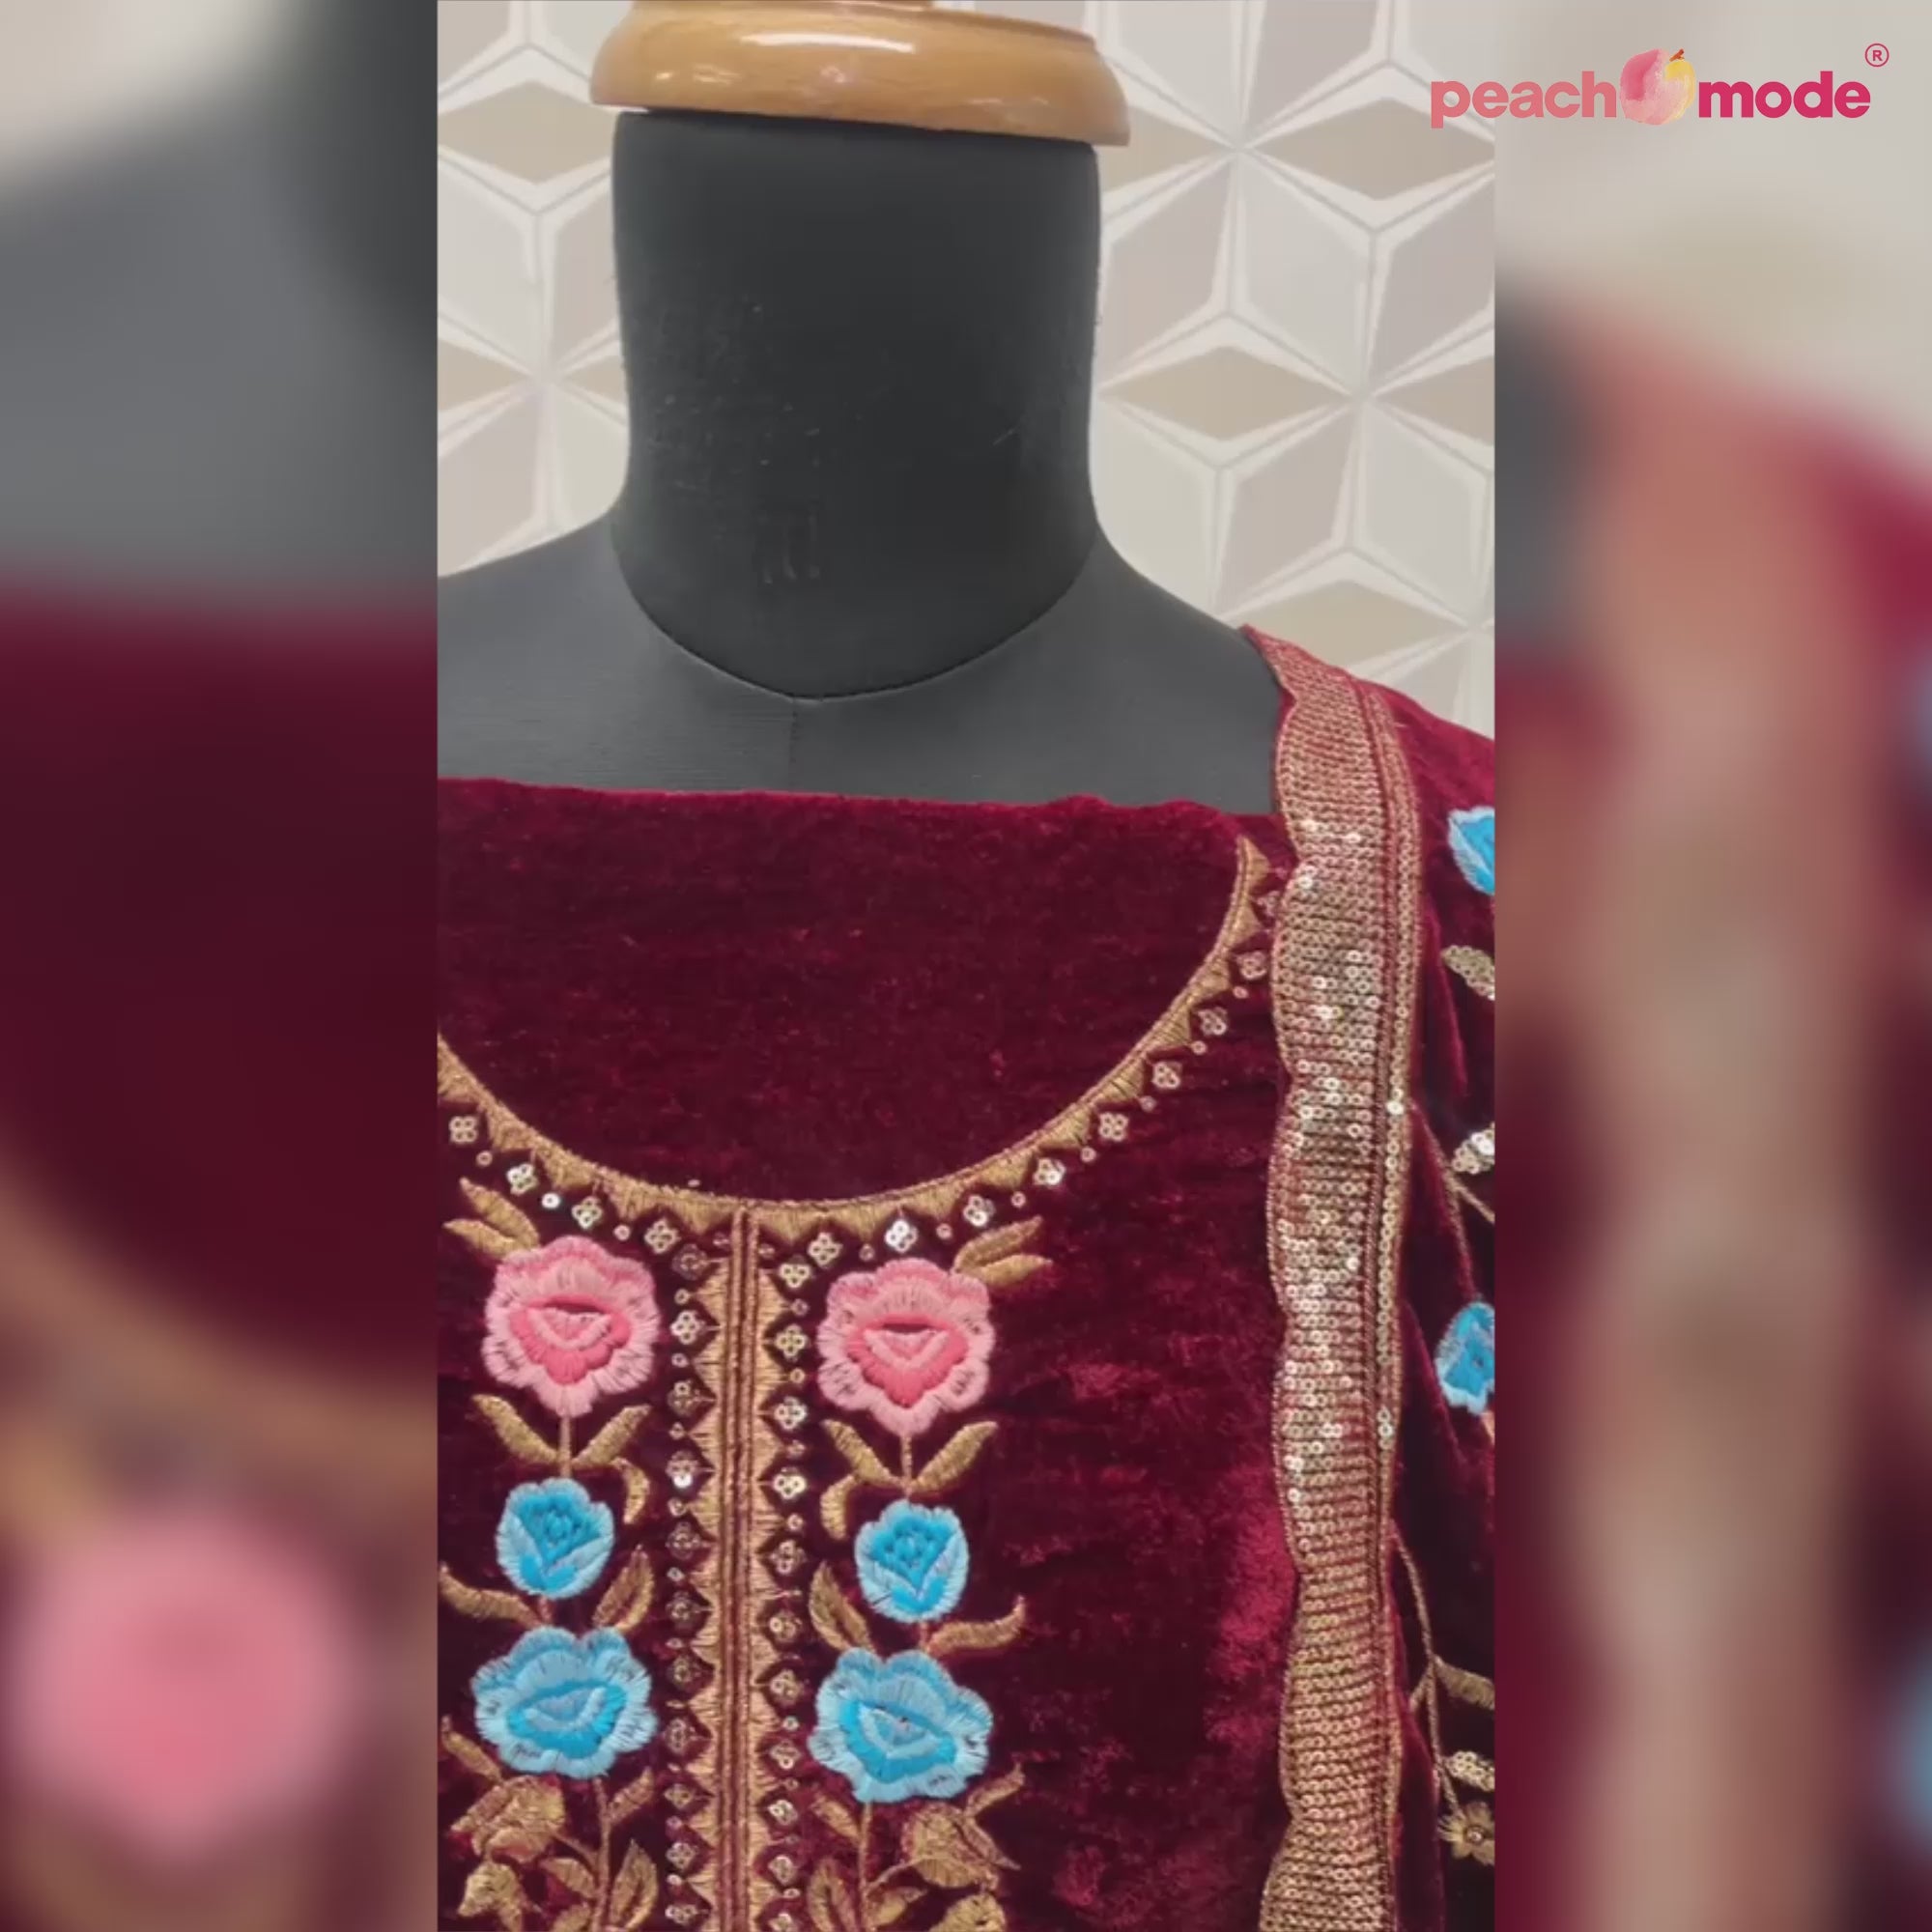 Maroon Floral Embroidered Velvet Semi Stitched Suit